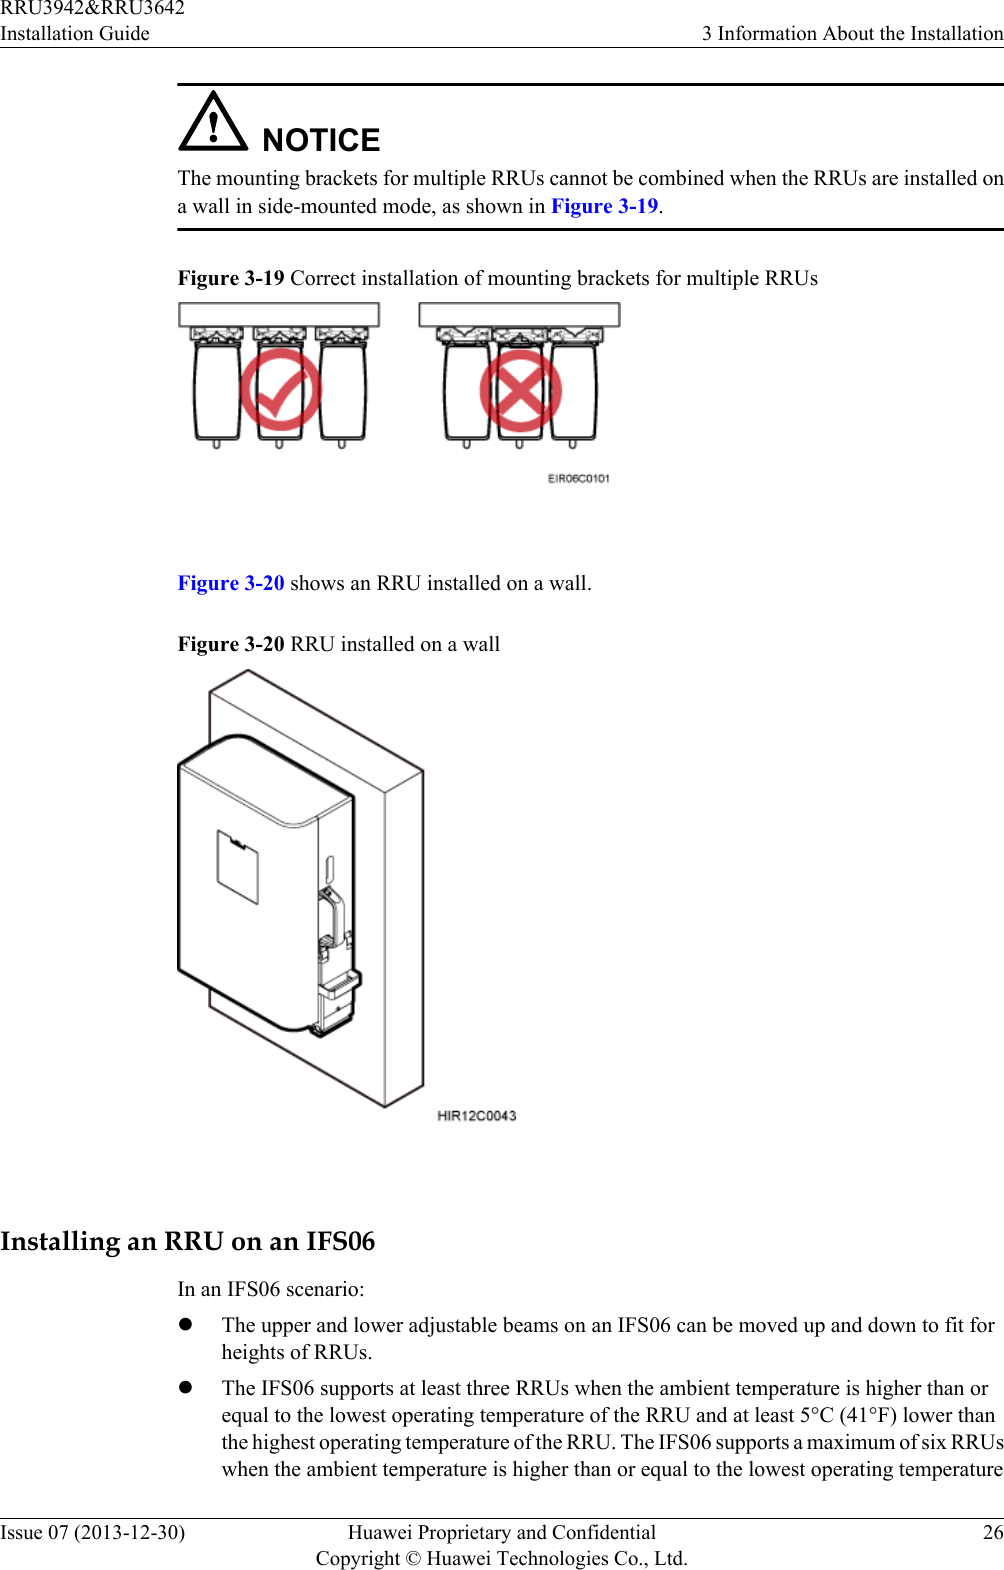 NOTICEThe mounting brackets for multiple RRUs cannot be combined when the RRUs are installed ona wall in side-mounted mode, as shown in Figure 3-19.Figure 3-19 Correct installation of mounting brackets for multiple RRUs Figure 3-20 shows an RRU installed on a wall.Figure 3-20 RRU installed on a wall Installing an RRU on an IFS06In an IFS06 scenario:lThe upper and lower adjustable beams on an IFS06 can be moved up and down to fit forheights of RRUs.lThe IFS06 supports at least three RRUs when the ambient temperature is higher than orequal to the lowest operating temperature of the RRU and at least 5°C (41°F) lower thanthe highest operating temperature of the RRU. The IFS06 supports a maximum of six RRUswhen the ambient temperature is higher than or equal to the lowest operating temperatureRRU3942&amp;RRU3642Installation Guide 3 Information About the InstallationIssue 07 (2013-12-30) Huawei Proprietary and ConfidentialCopyright © Huawei Technologies Co., Ltd.26